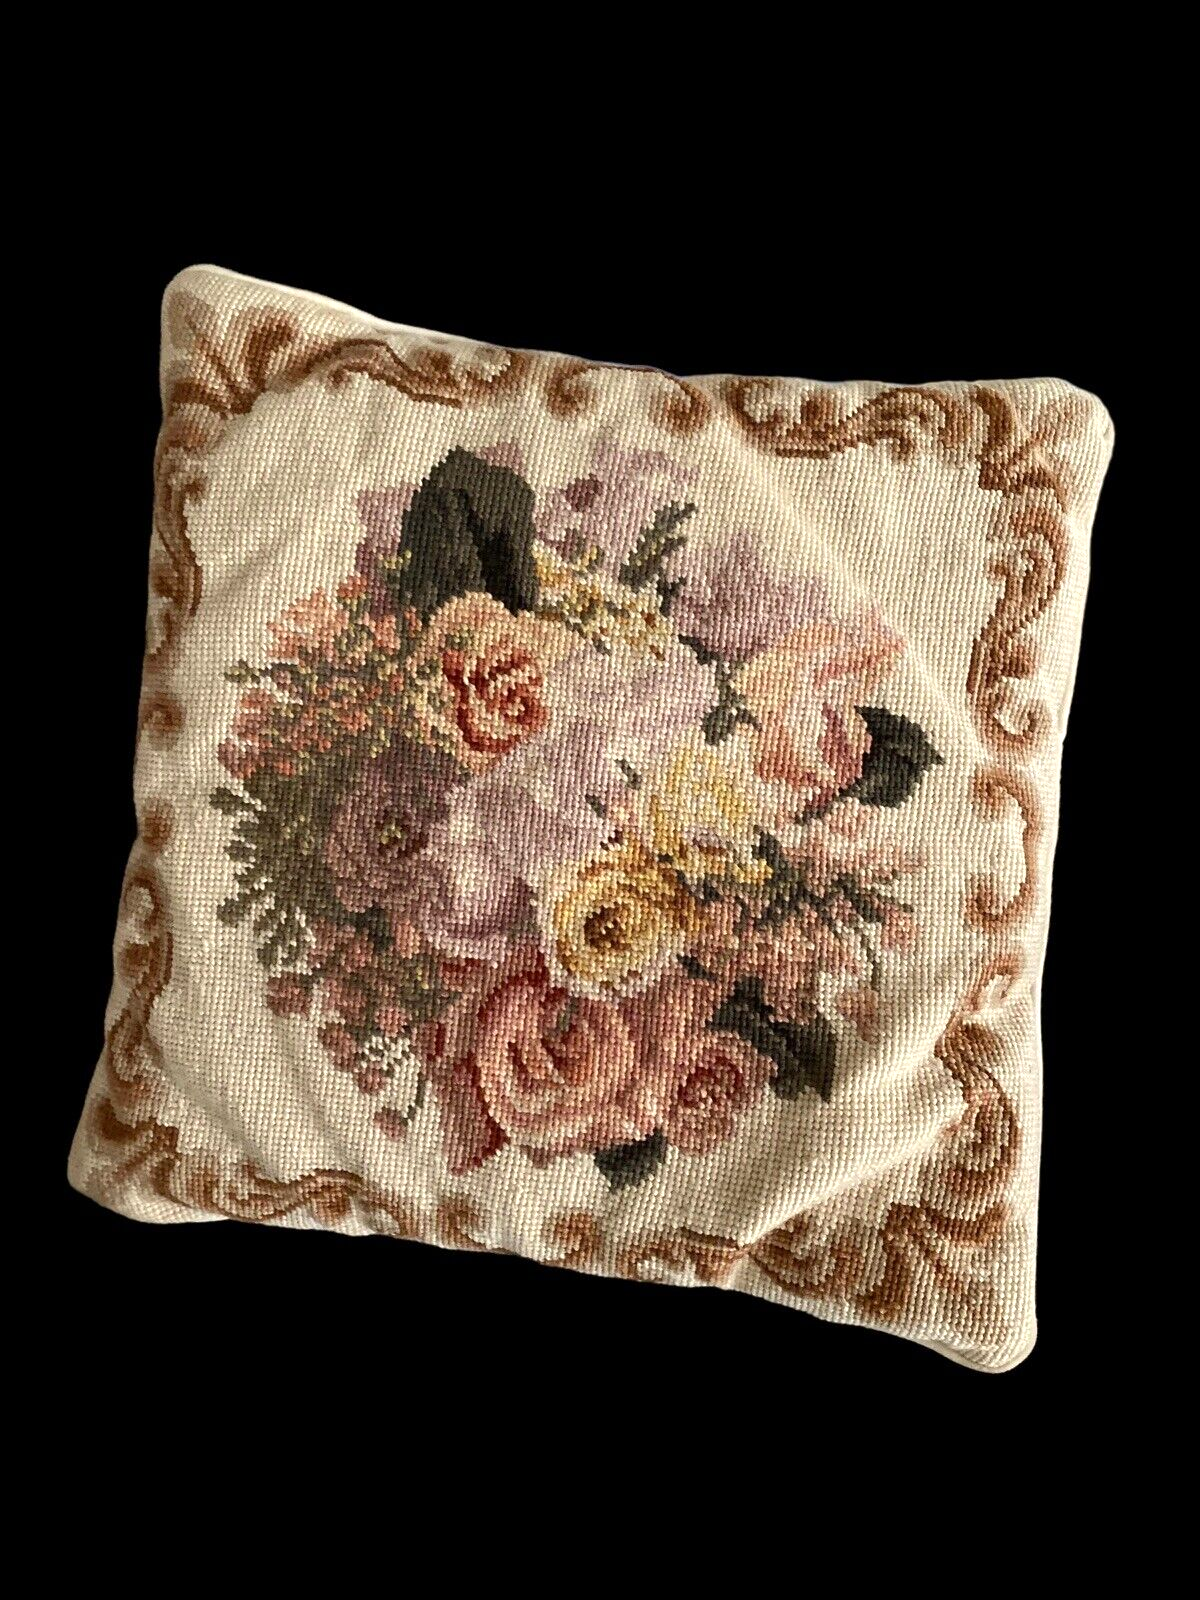 Primary image for Vtg Pillow Needlepoint Tapestry Floral Flowers Romantic English Country 15"x15"